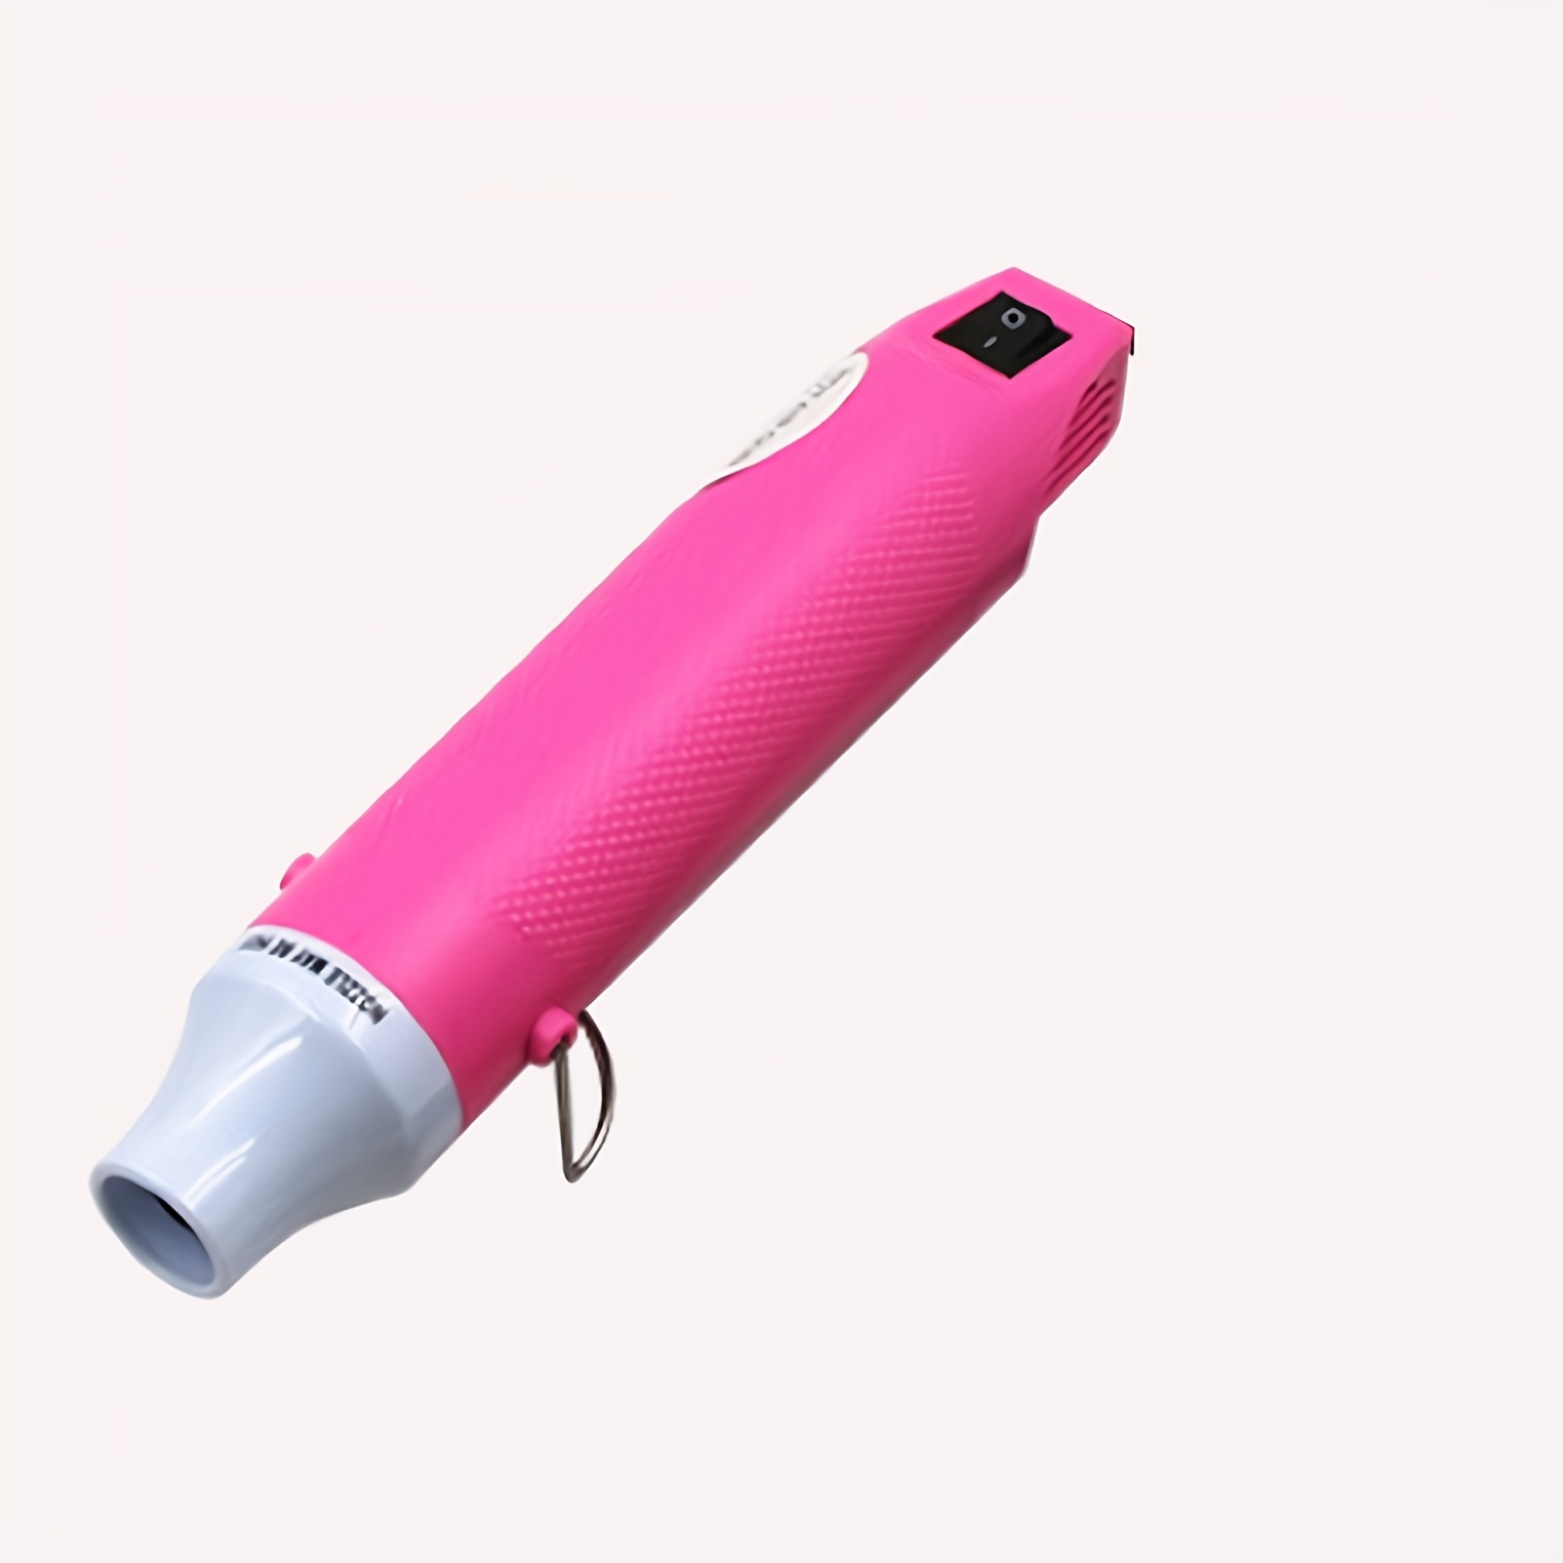 DODOING Heat Gun for Crafts, Mini Heat Gun for Epoxy Resin, 300W Portable  DIY Acrylic Resin Craft, Dryer Crafts Heat Tool for Cup Turner, Shrink  Wrapping, Crafts Embossing 